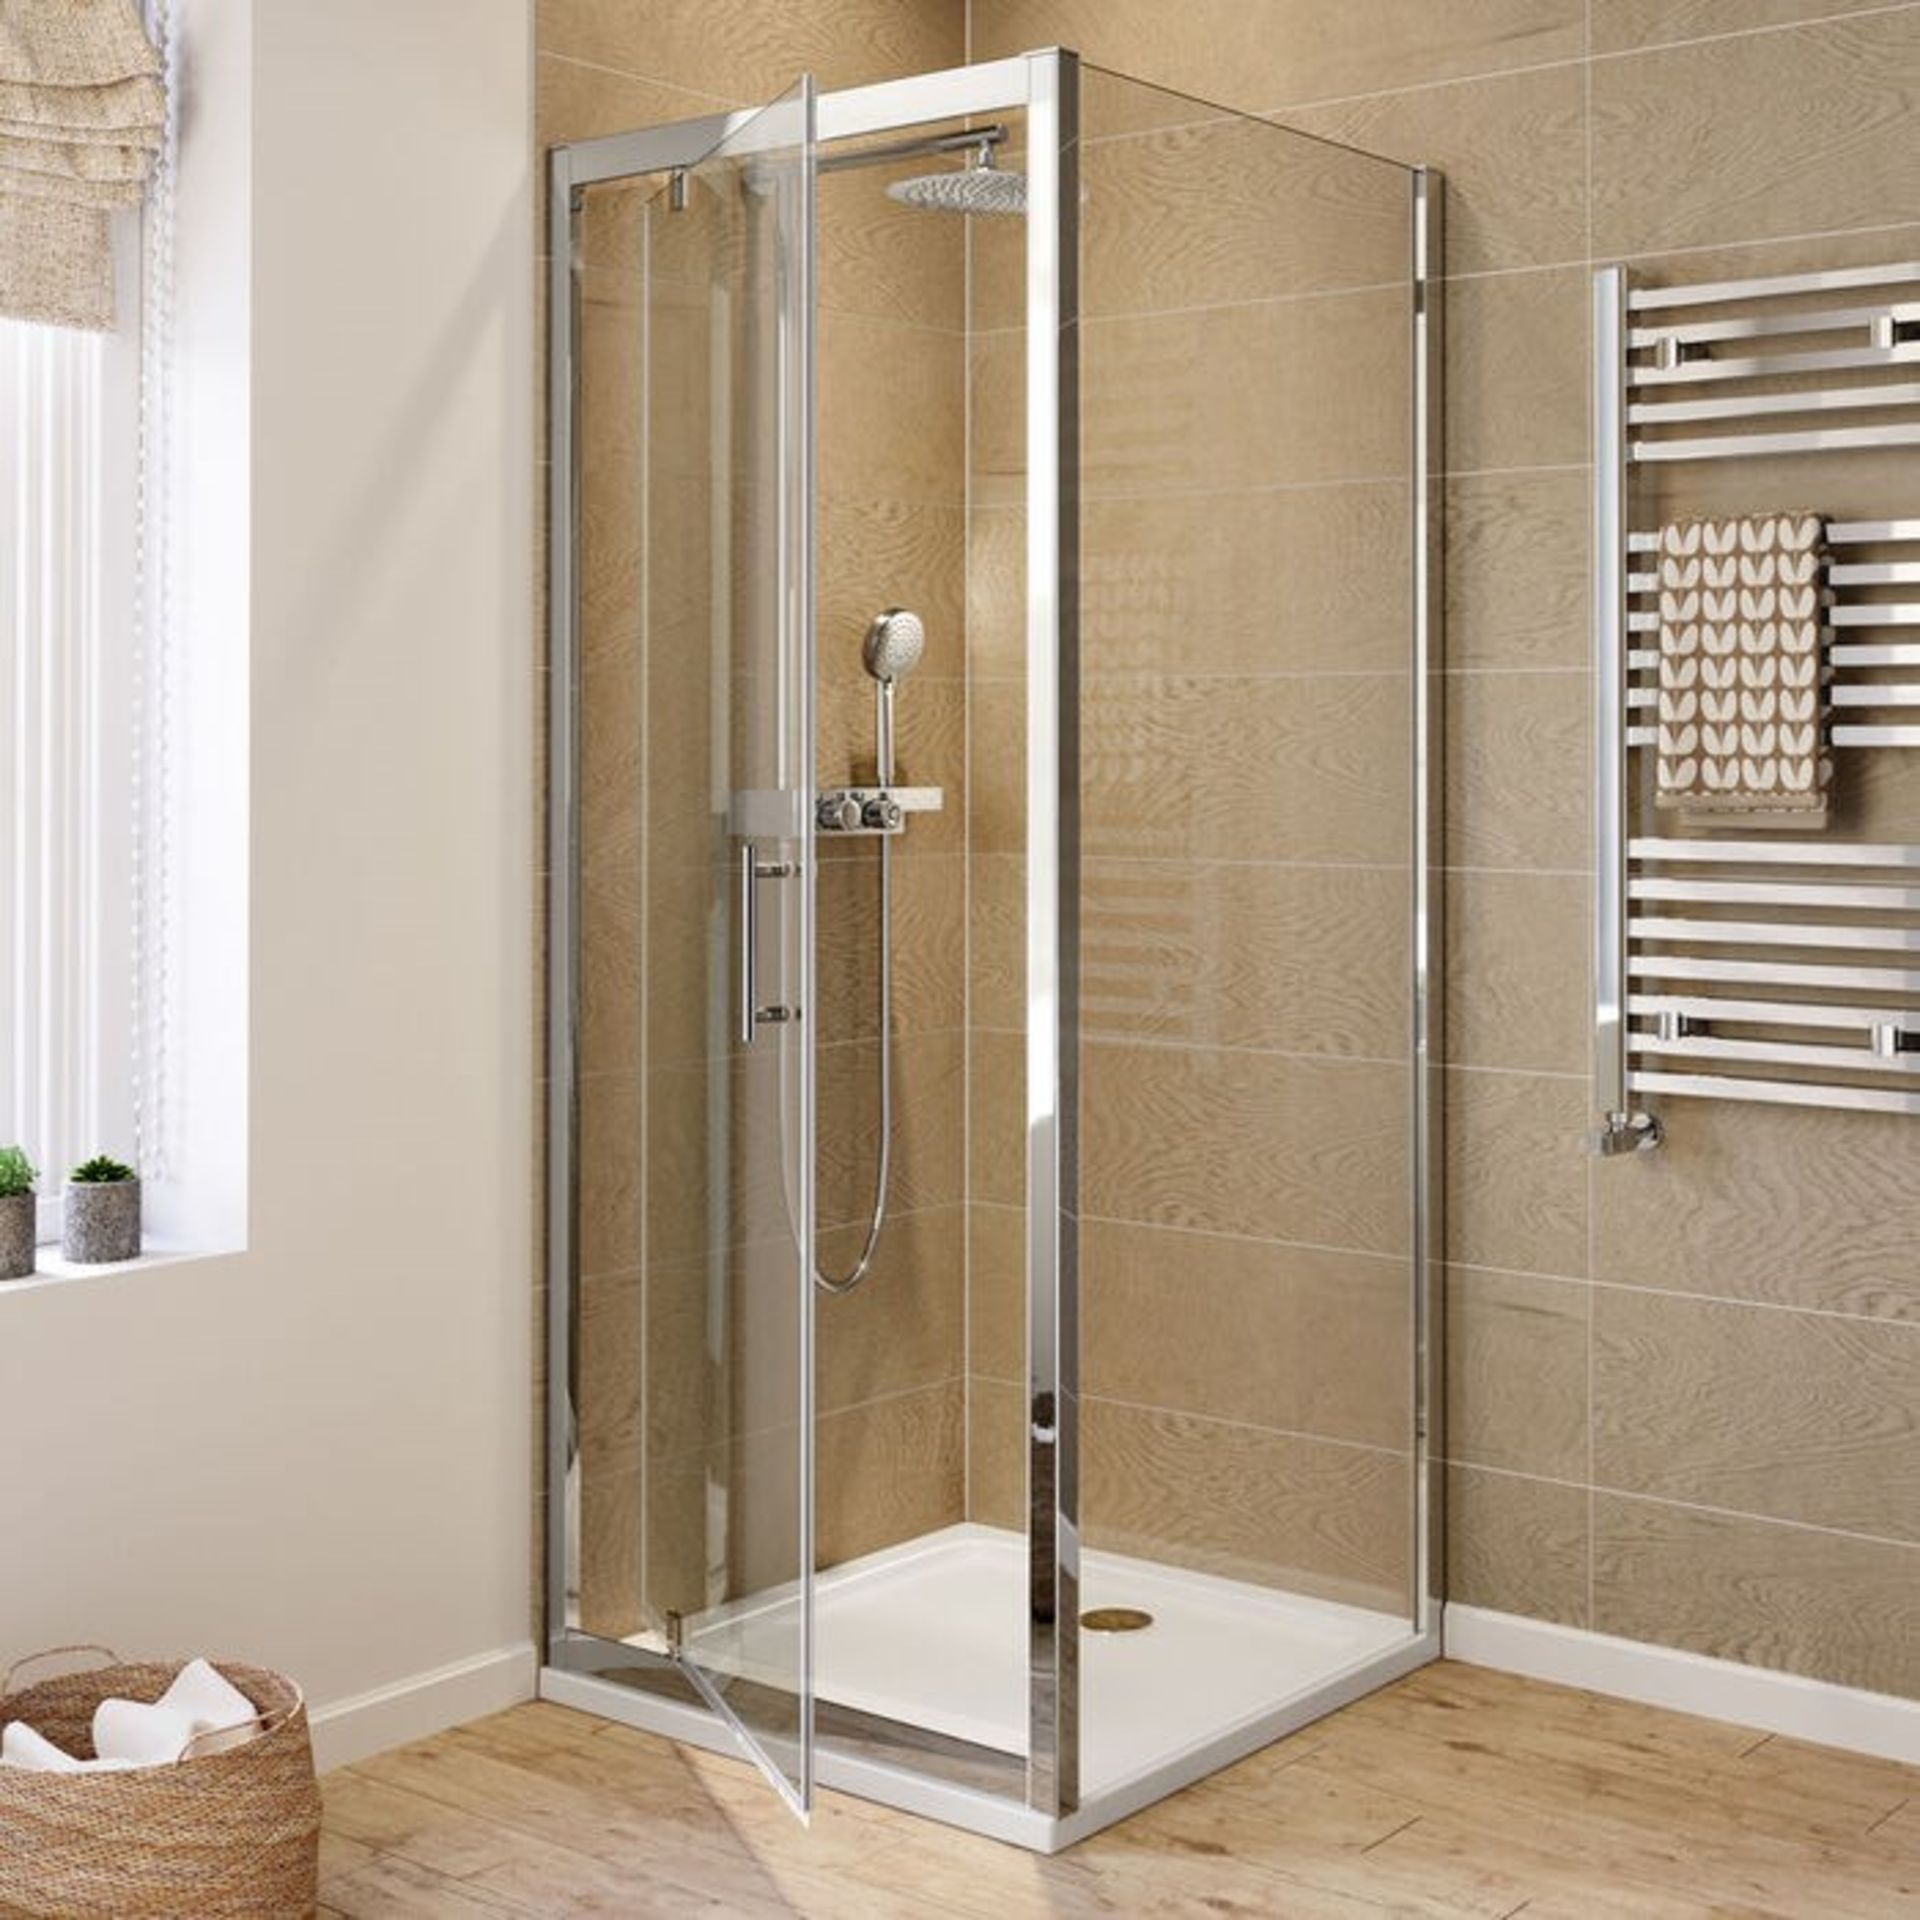 Twyfords 700x700mm - 6mm - Elements Pivot Door Shower Enclosure. RRP £330.99.6mm Safety Glass ... - Image 2 of 4